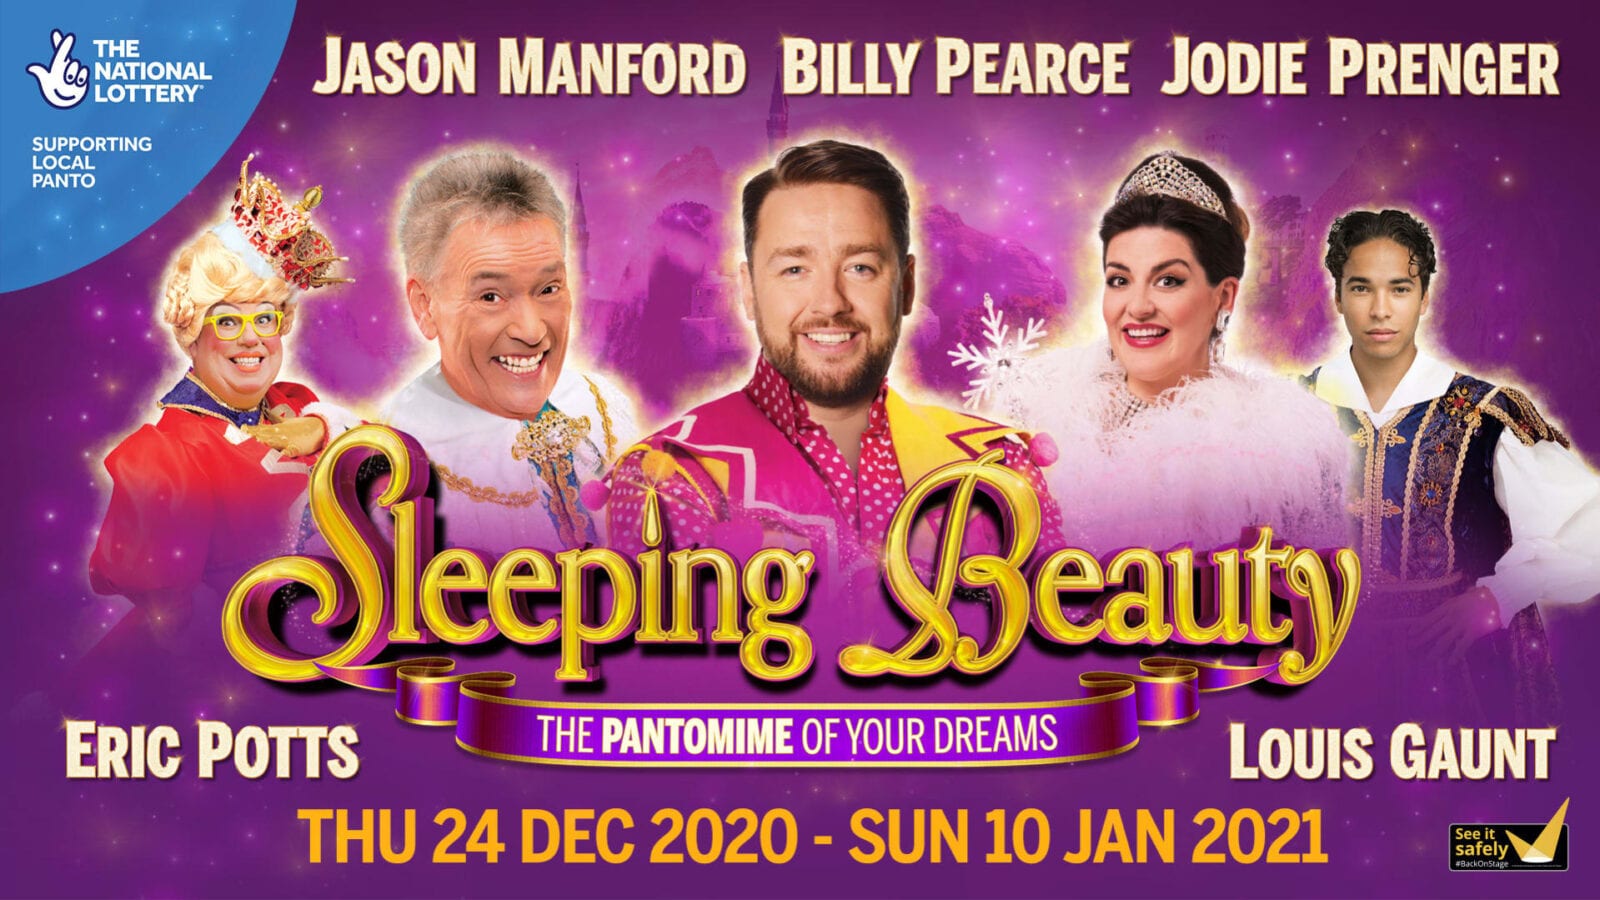 Manchester Opera House announces revised dates for socially-distanced Sleeping Beauty production, The Manc